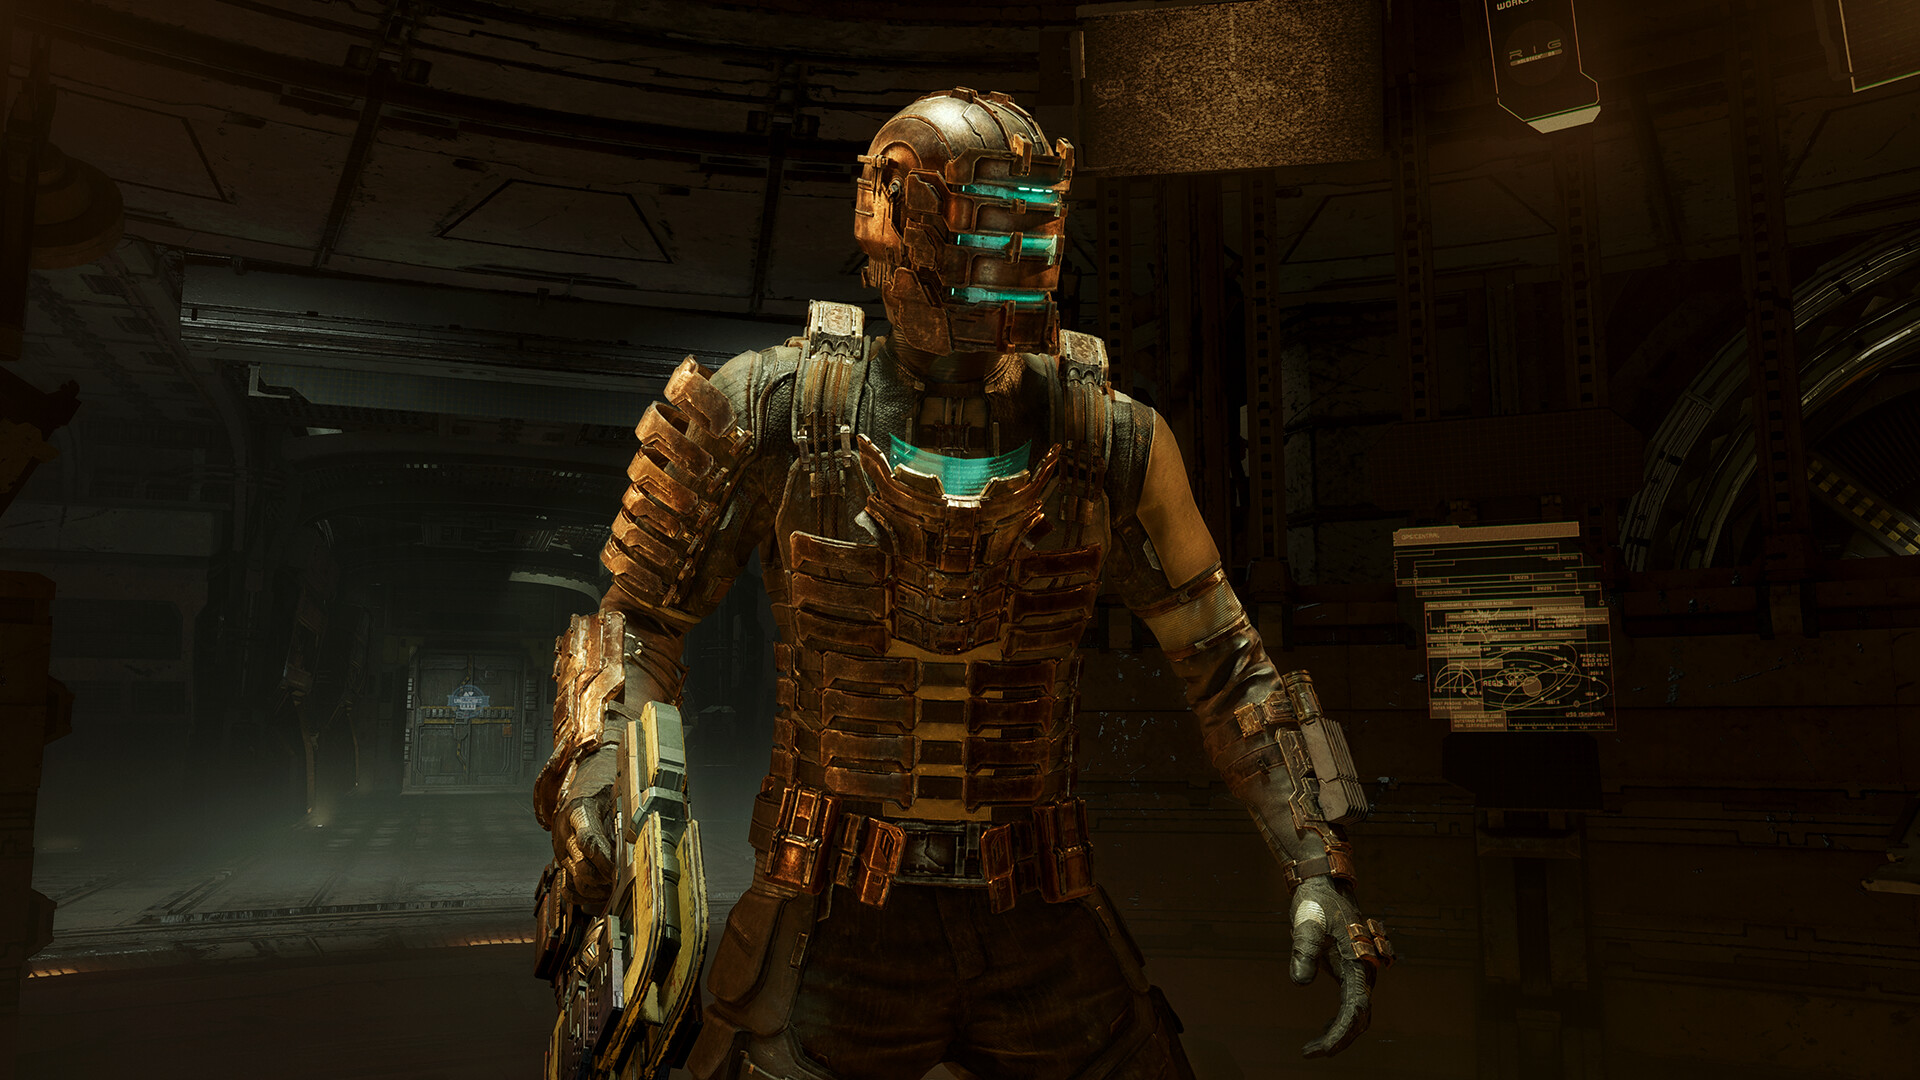 𝐑𝐮𝐥𝐞𝐓𝐢𝐦𝐞 on X: Dead Space Remake's different suits/skins